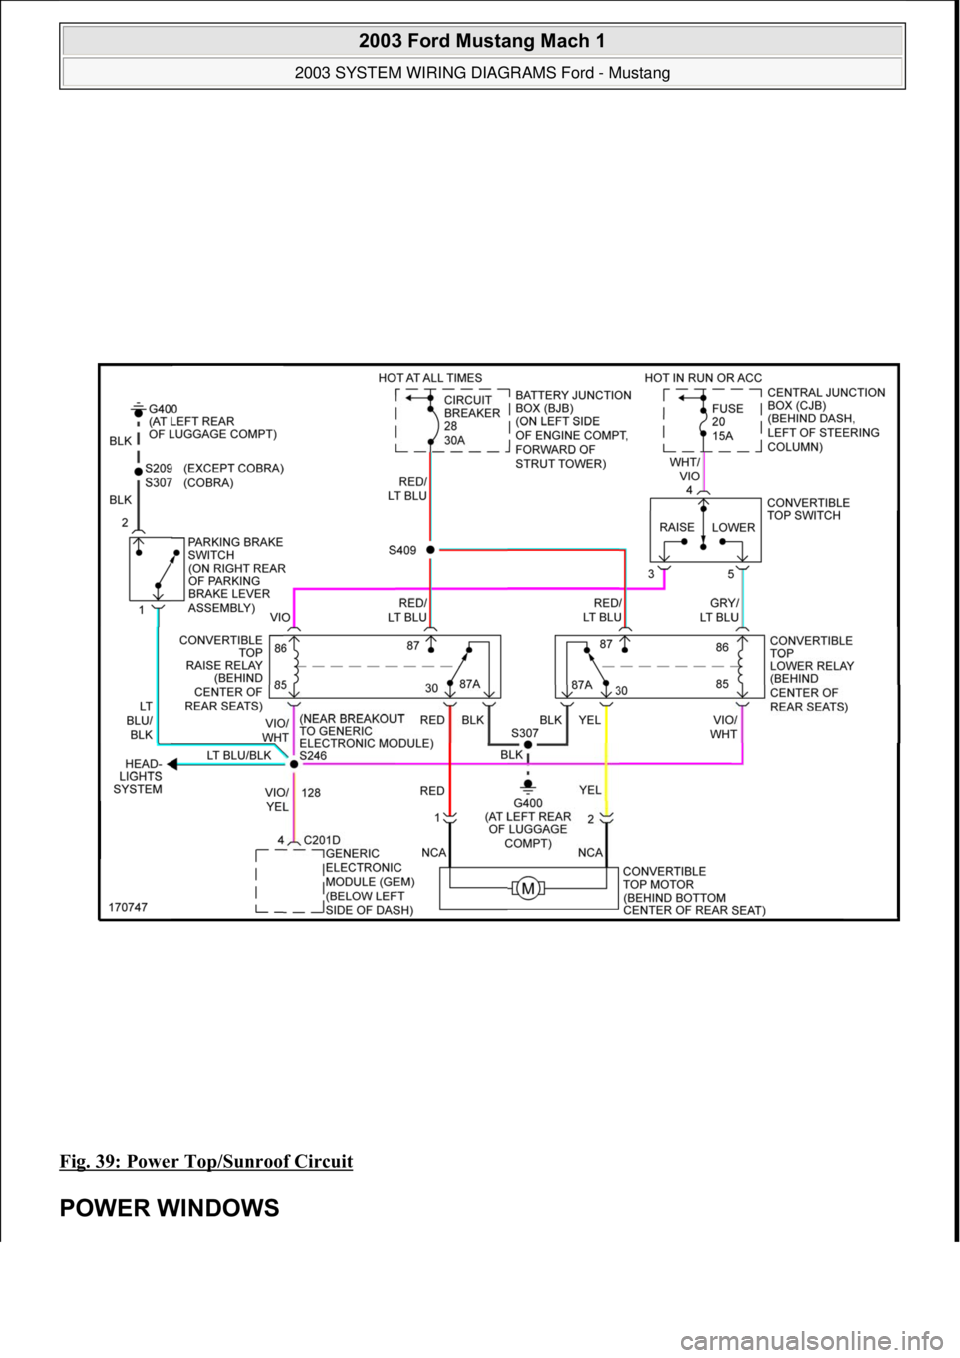 FORD MUSTANG 2003  Workshop Manual Fig. 39: Power Top/Sunroof Circuit 
POWER WINDOWS 
 
2003 Ford Mustang Mach 1 
2003 SYSTEM WIRING DIAGRAMS Ford - Mustang  
111  
18 ноября  2011 г. 12:54:33Page 40 © 2006 Mitchell Repair Info